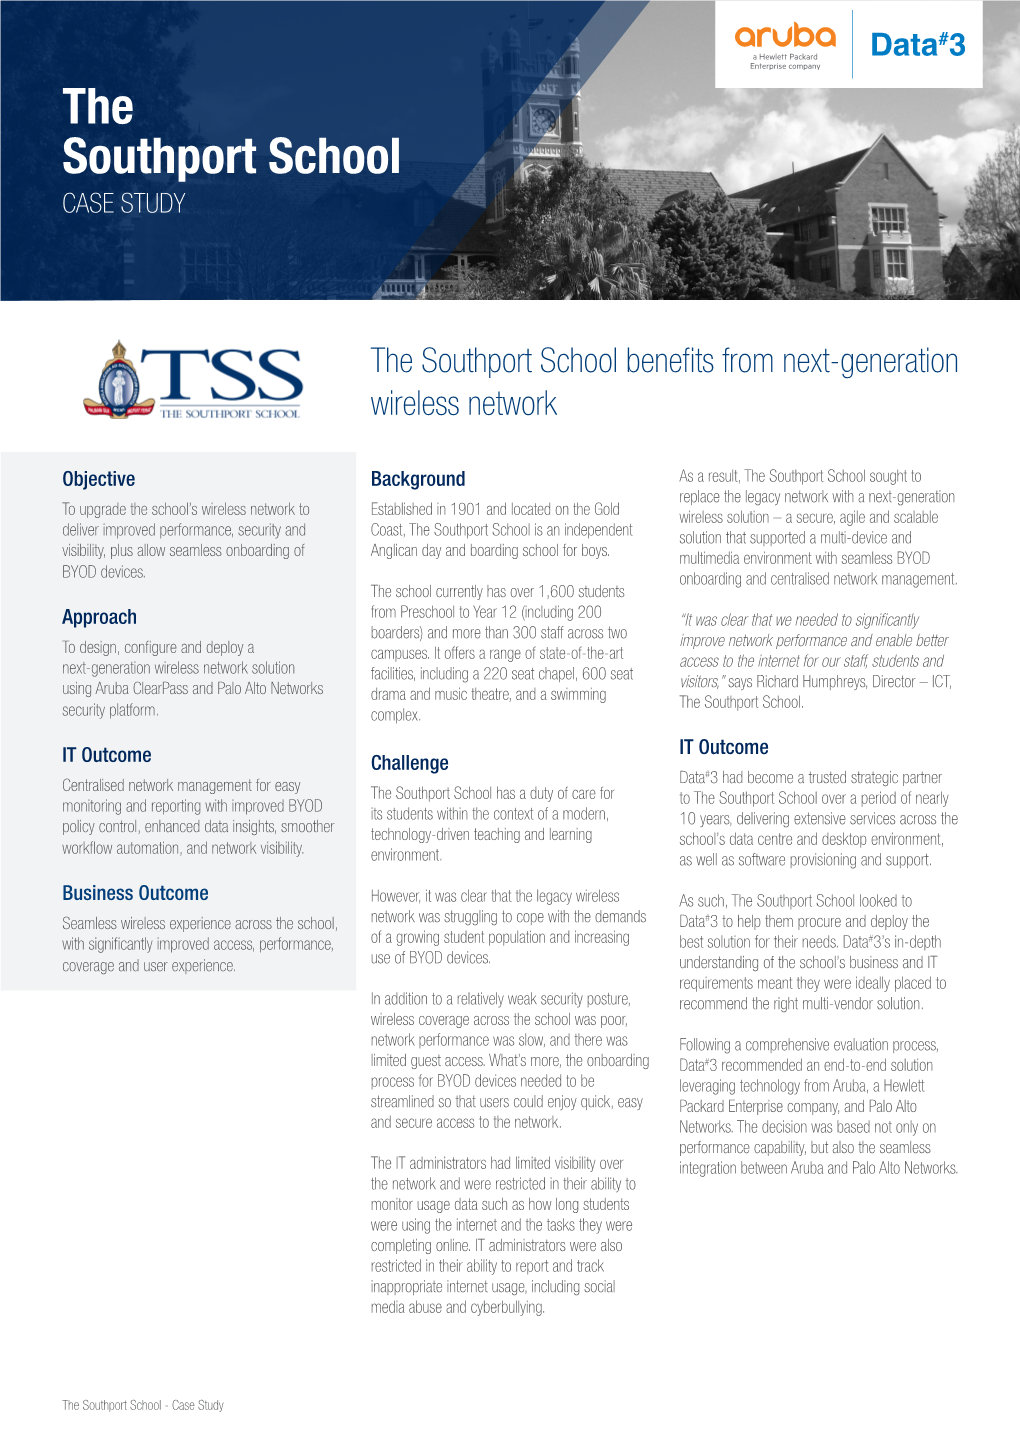 The Southport School CASE STUDY